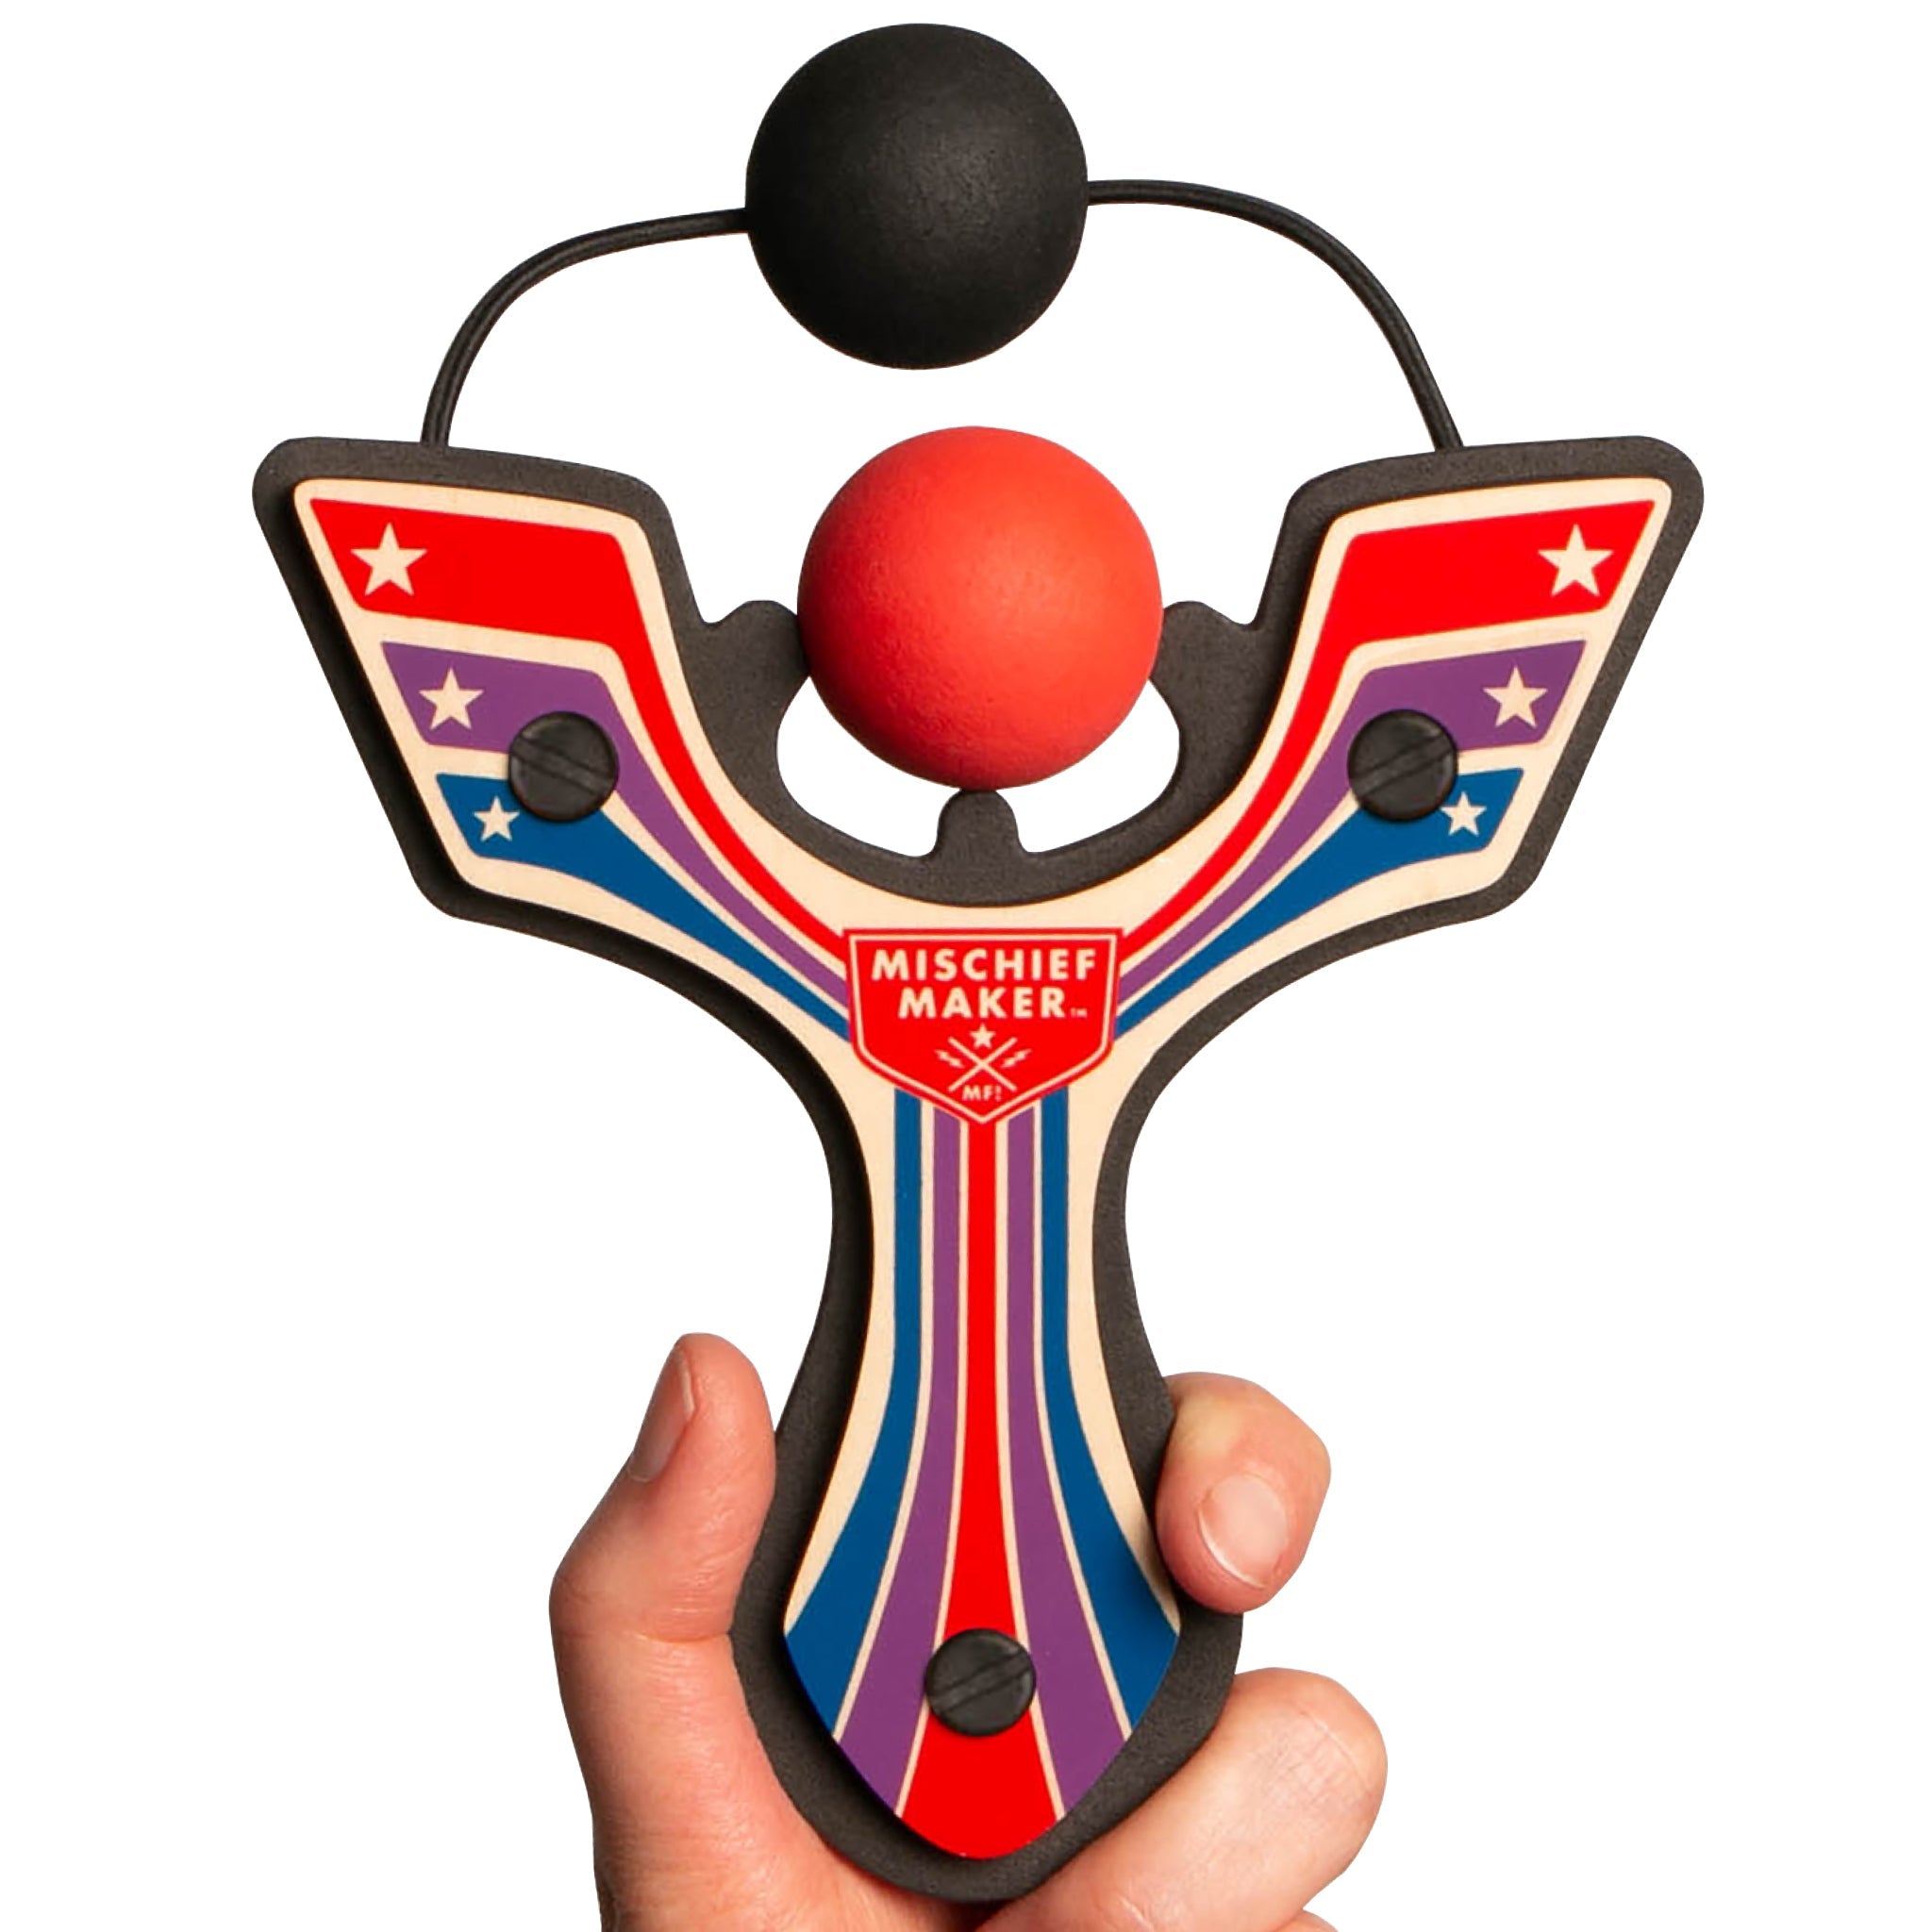 Red Racing best slingshot hand held with ball foam ball. Mischief Maker by Mighty Fun!